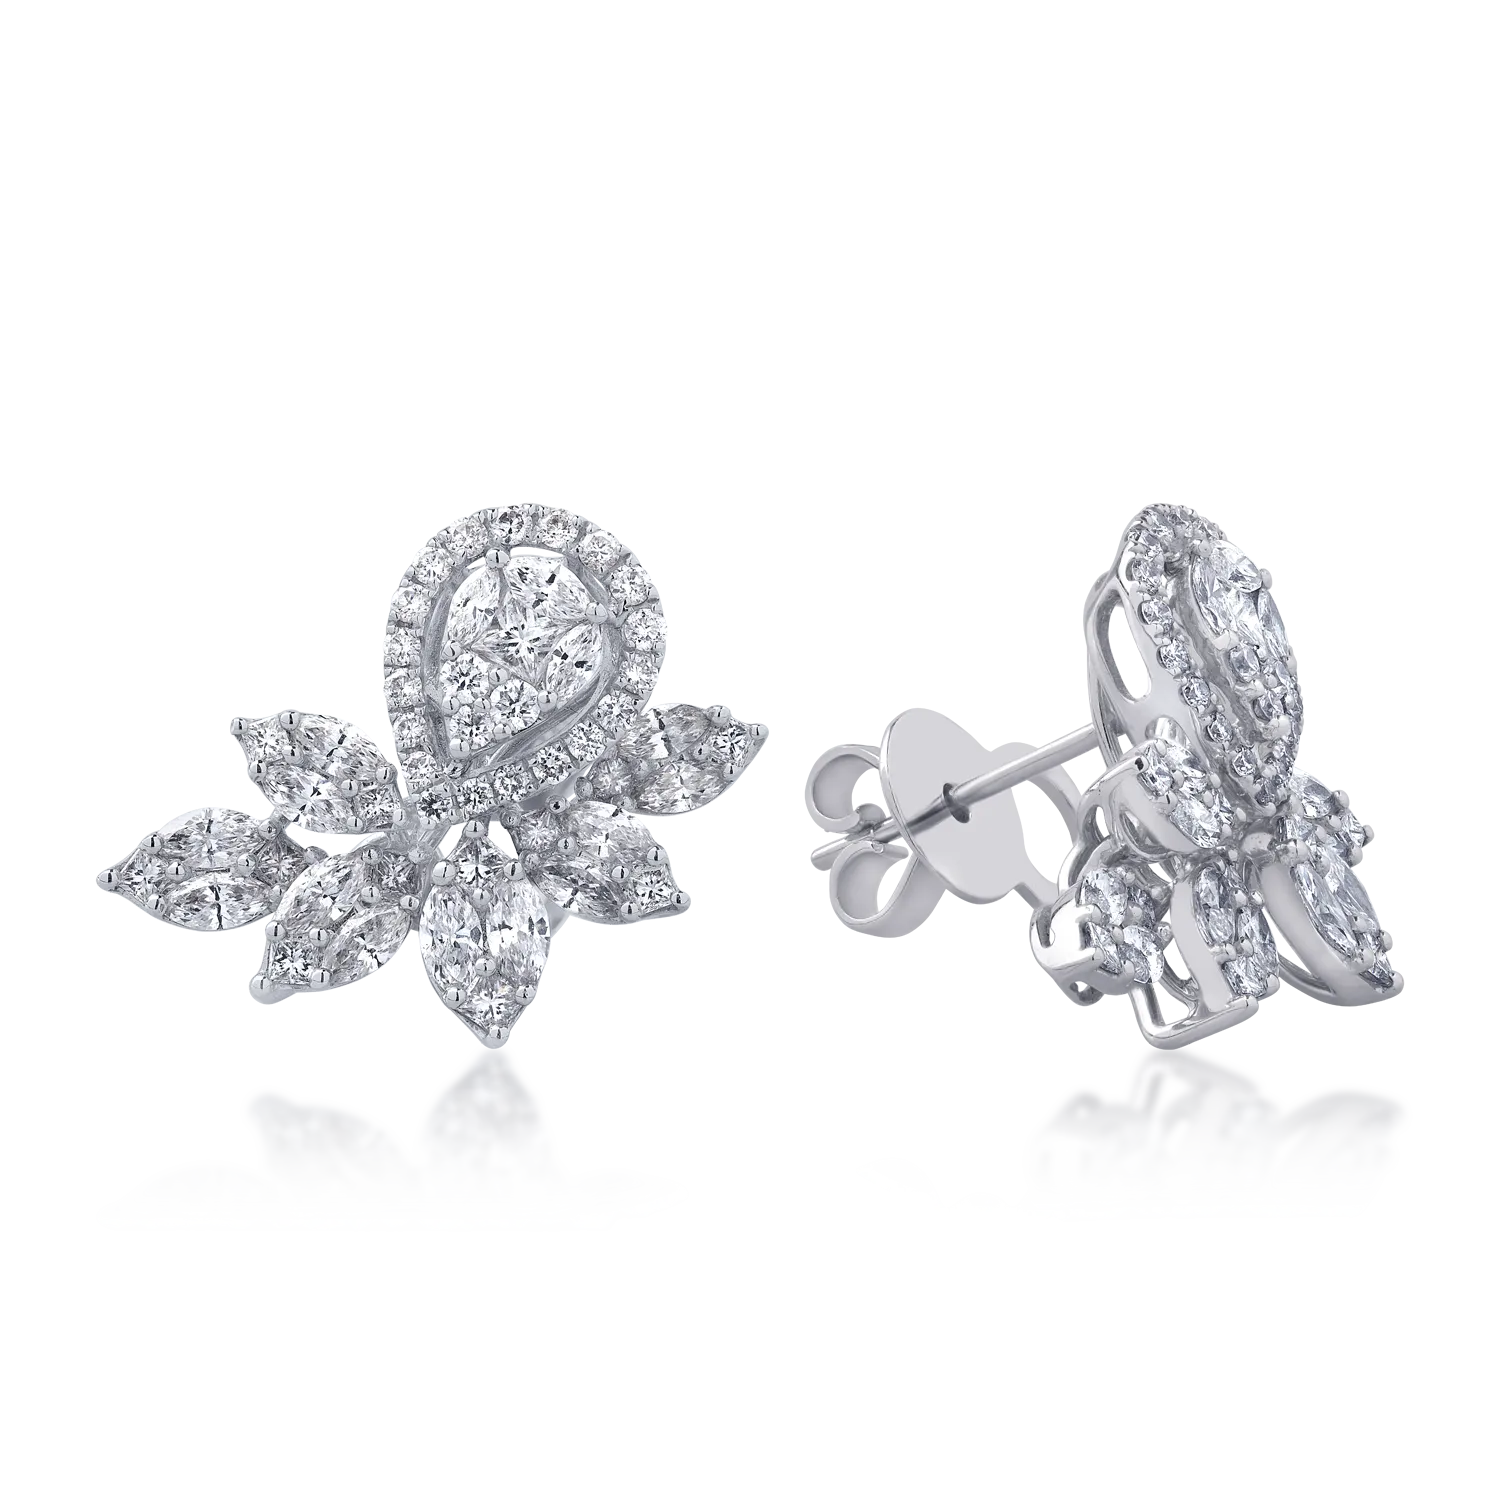 18K white gold earrings with 2.93ct diamonds